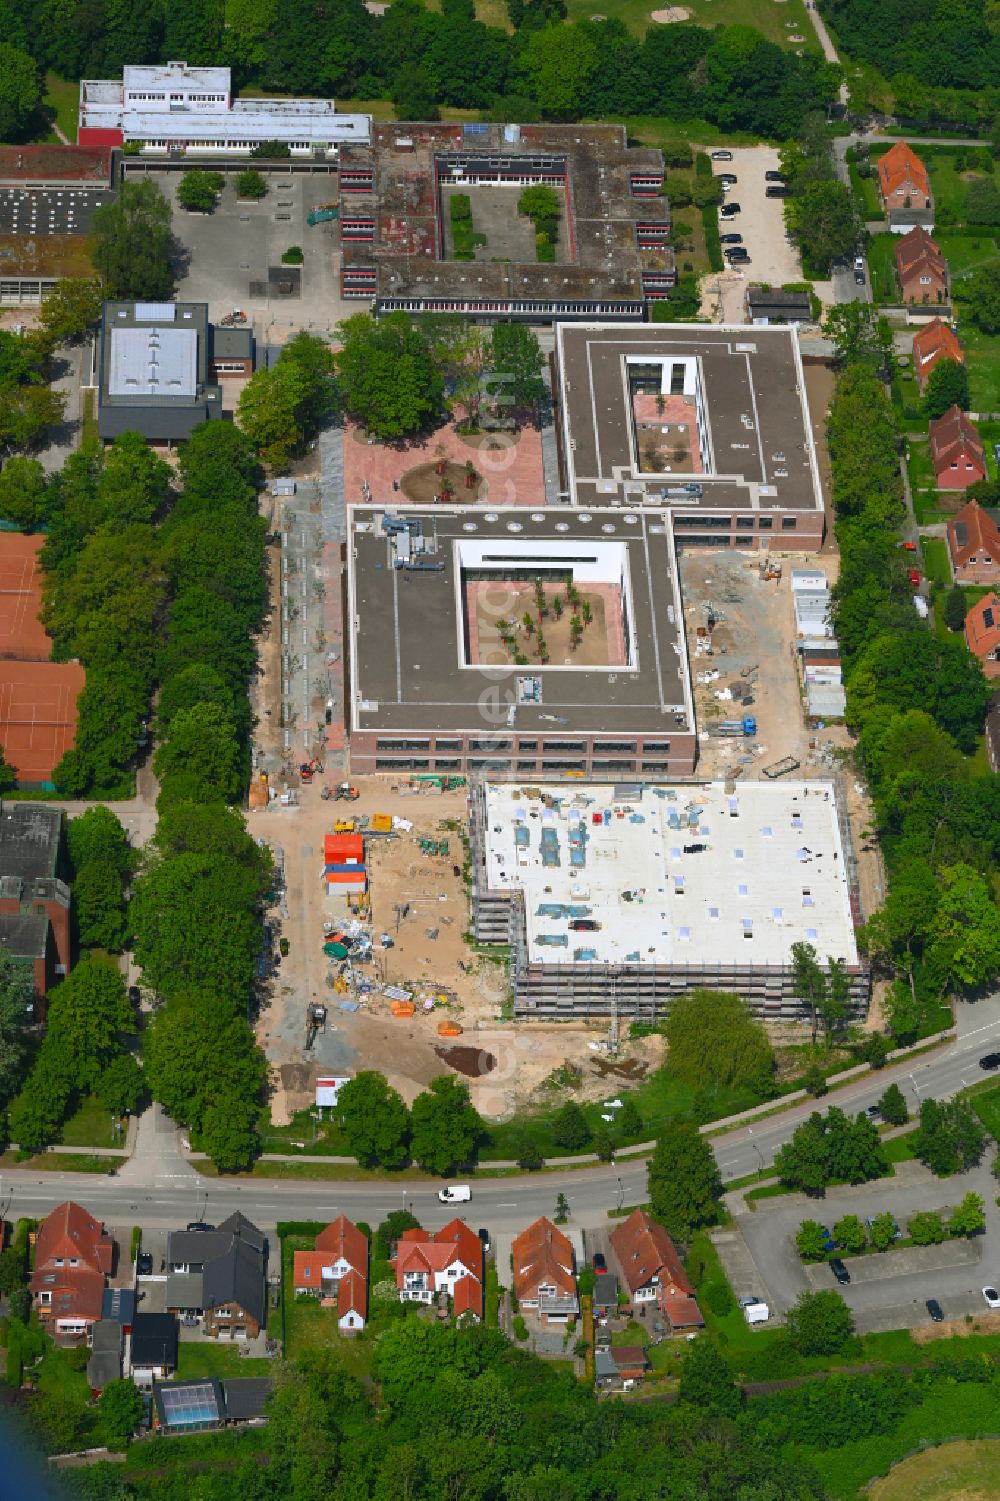 Oldenburg in Holstein from above - Construction sites for the reconstruction, expansion and modernization of the school building and campus Freiherr-vom-Stein-Gymnasium and the Wagrienschule on Adolf-Friedrich-Strasse in Oldenburg in Holstein in the federal state of Schleswig-Holstein, Germany